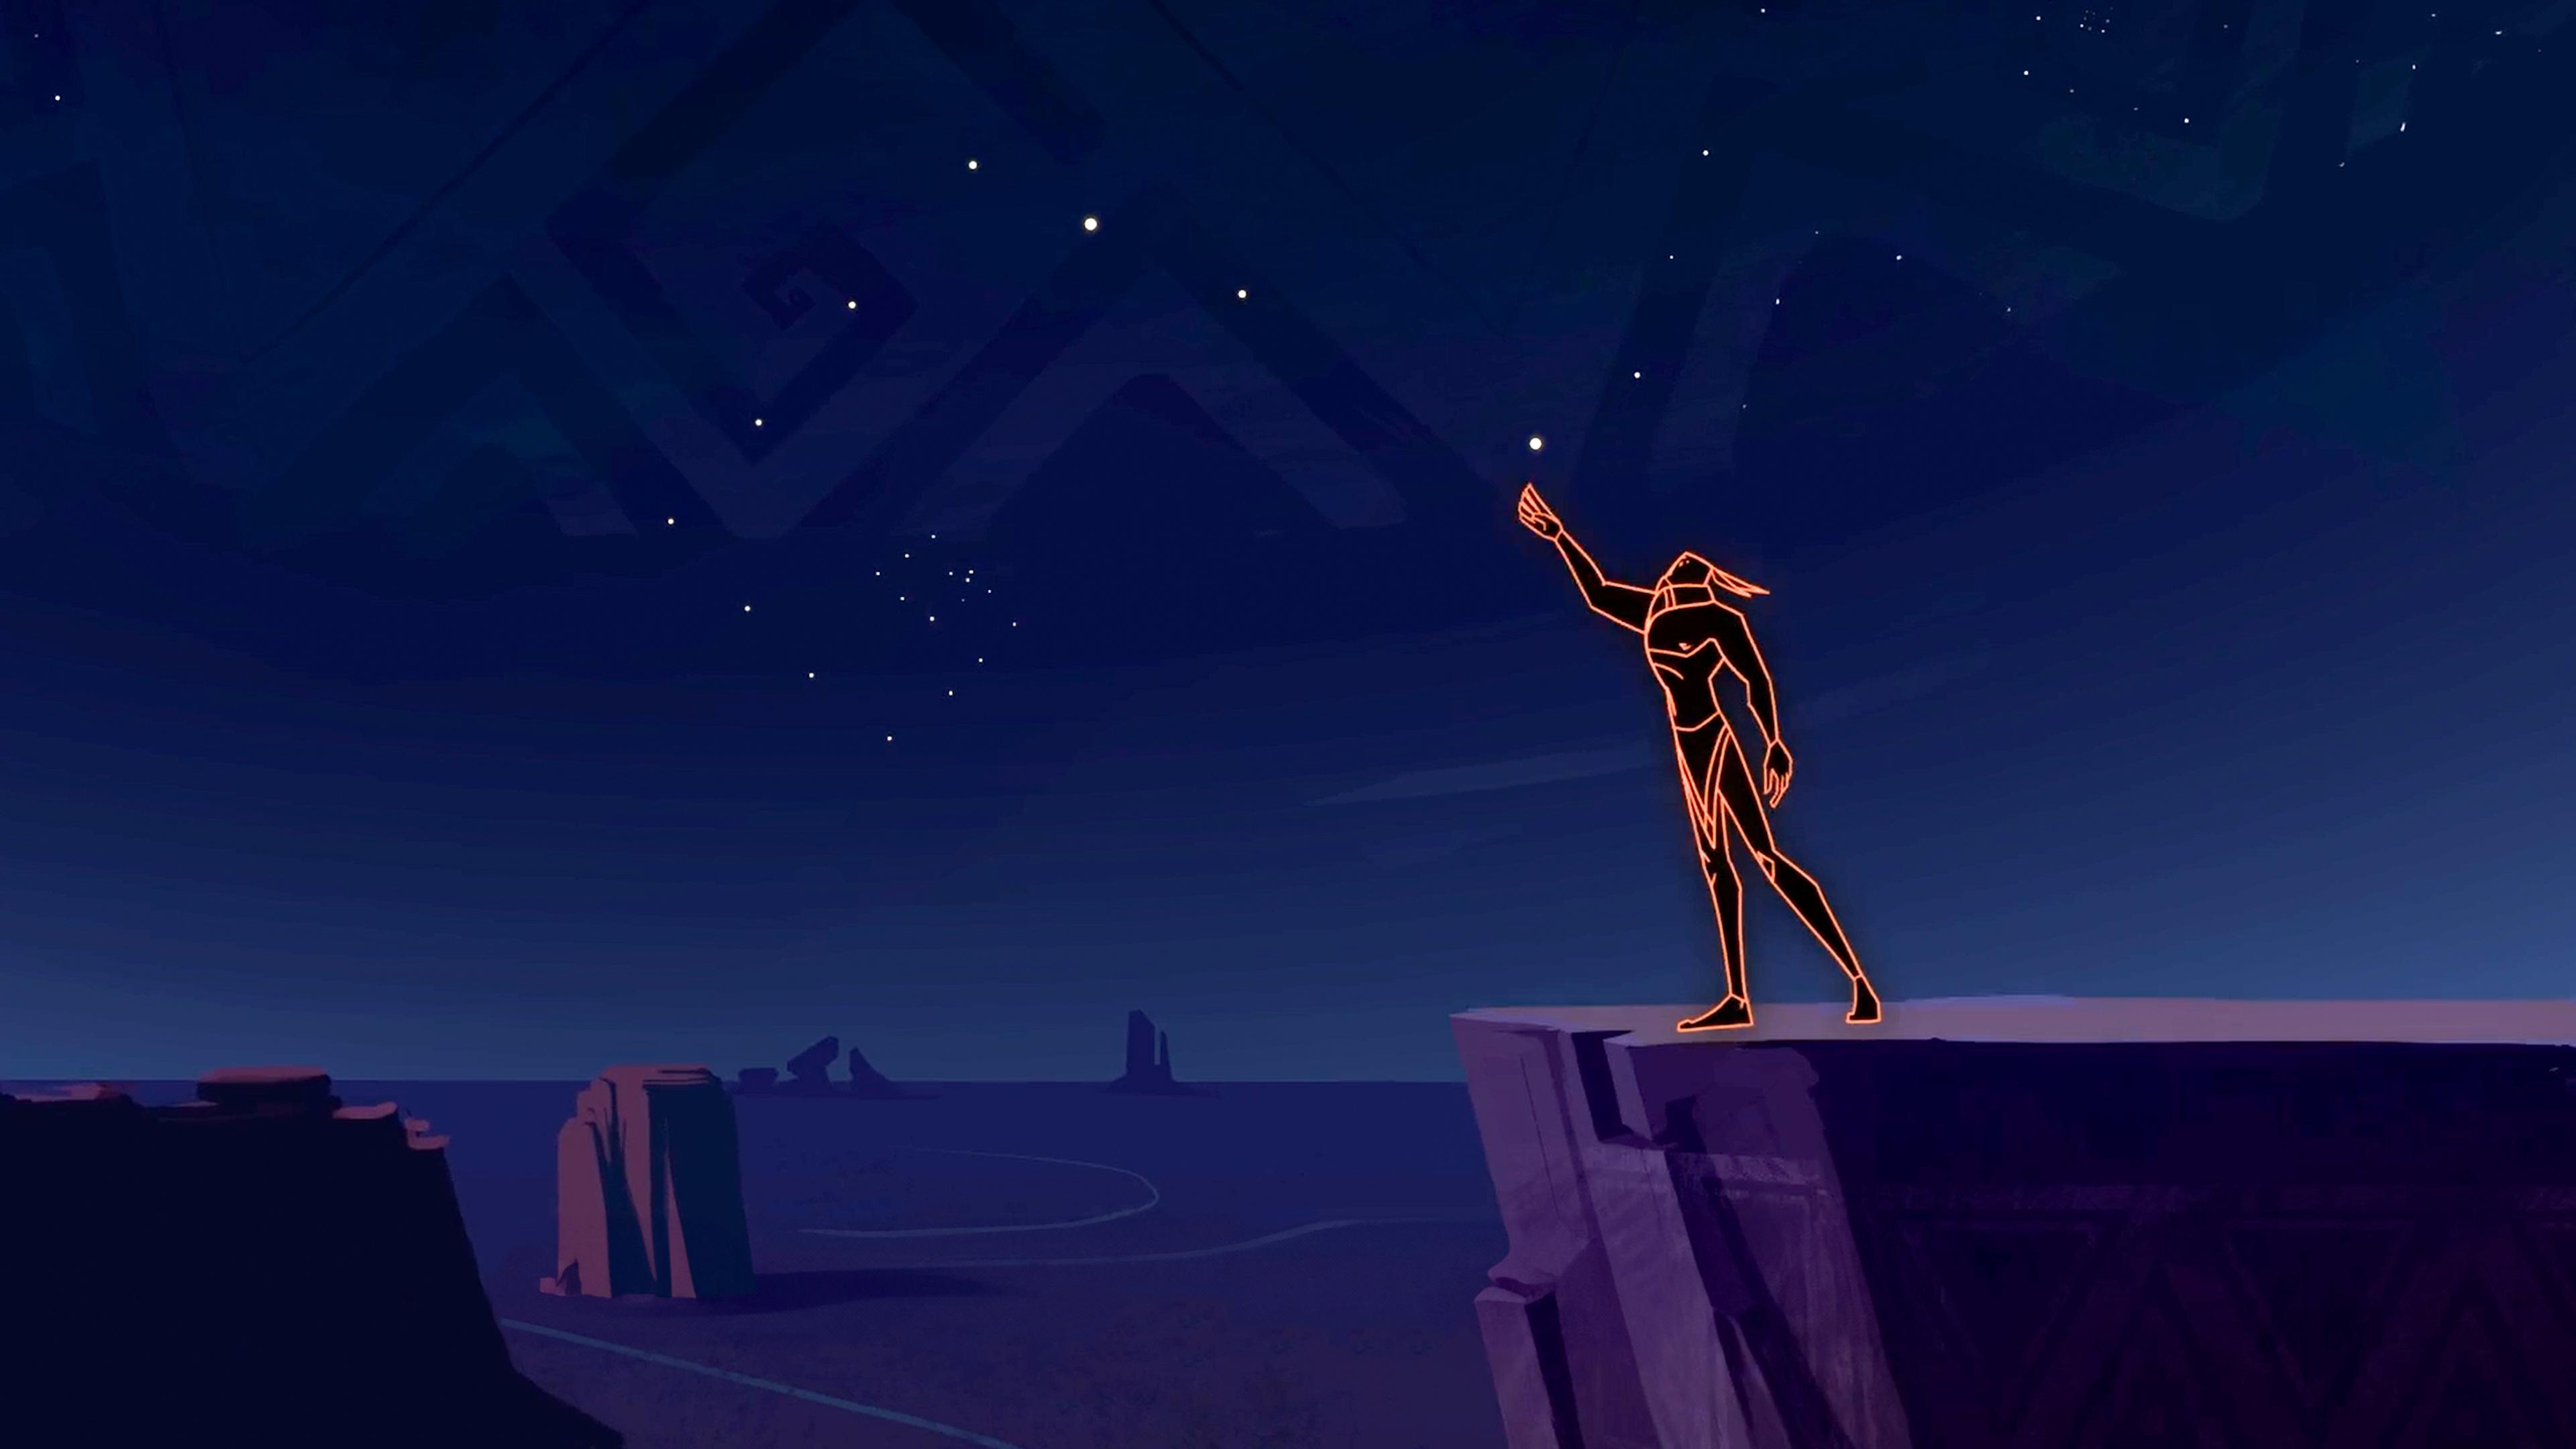 A stylised figure drawn in glowing red lines stands on a cliff reaching towards a dark sky full of stars above a calm sea. The scene has a mystical atmosphere.